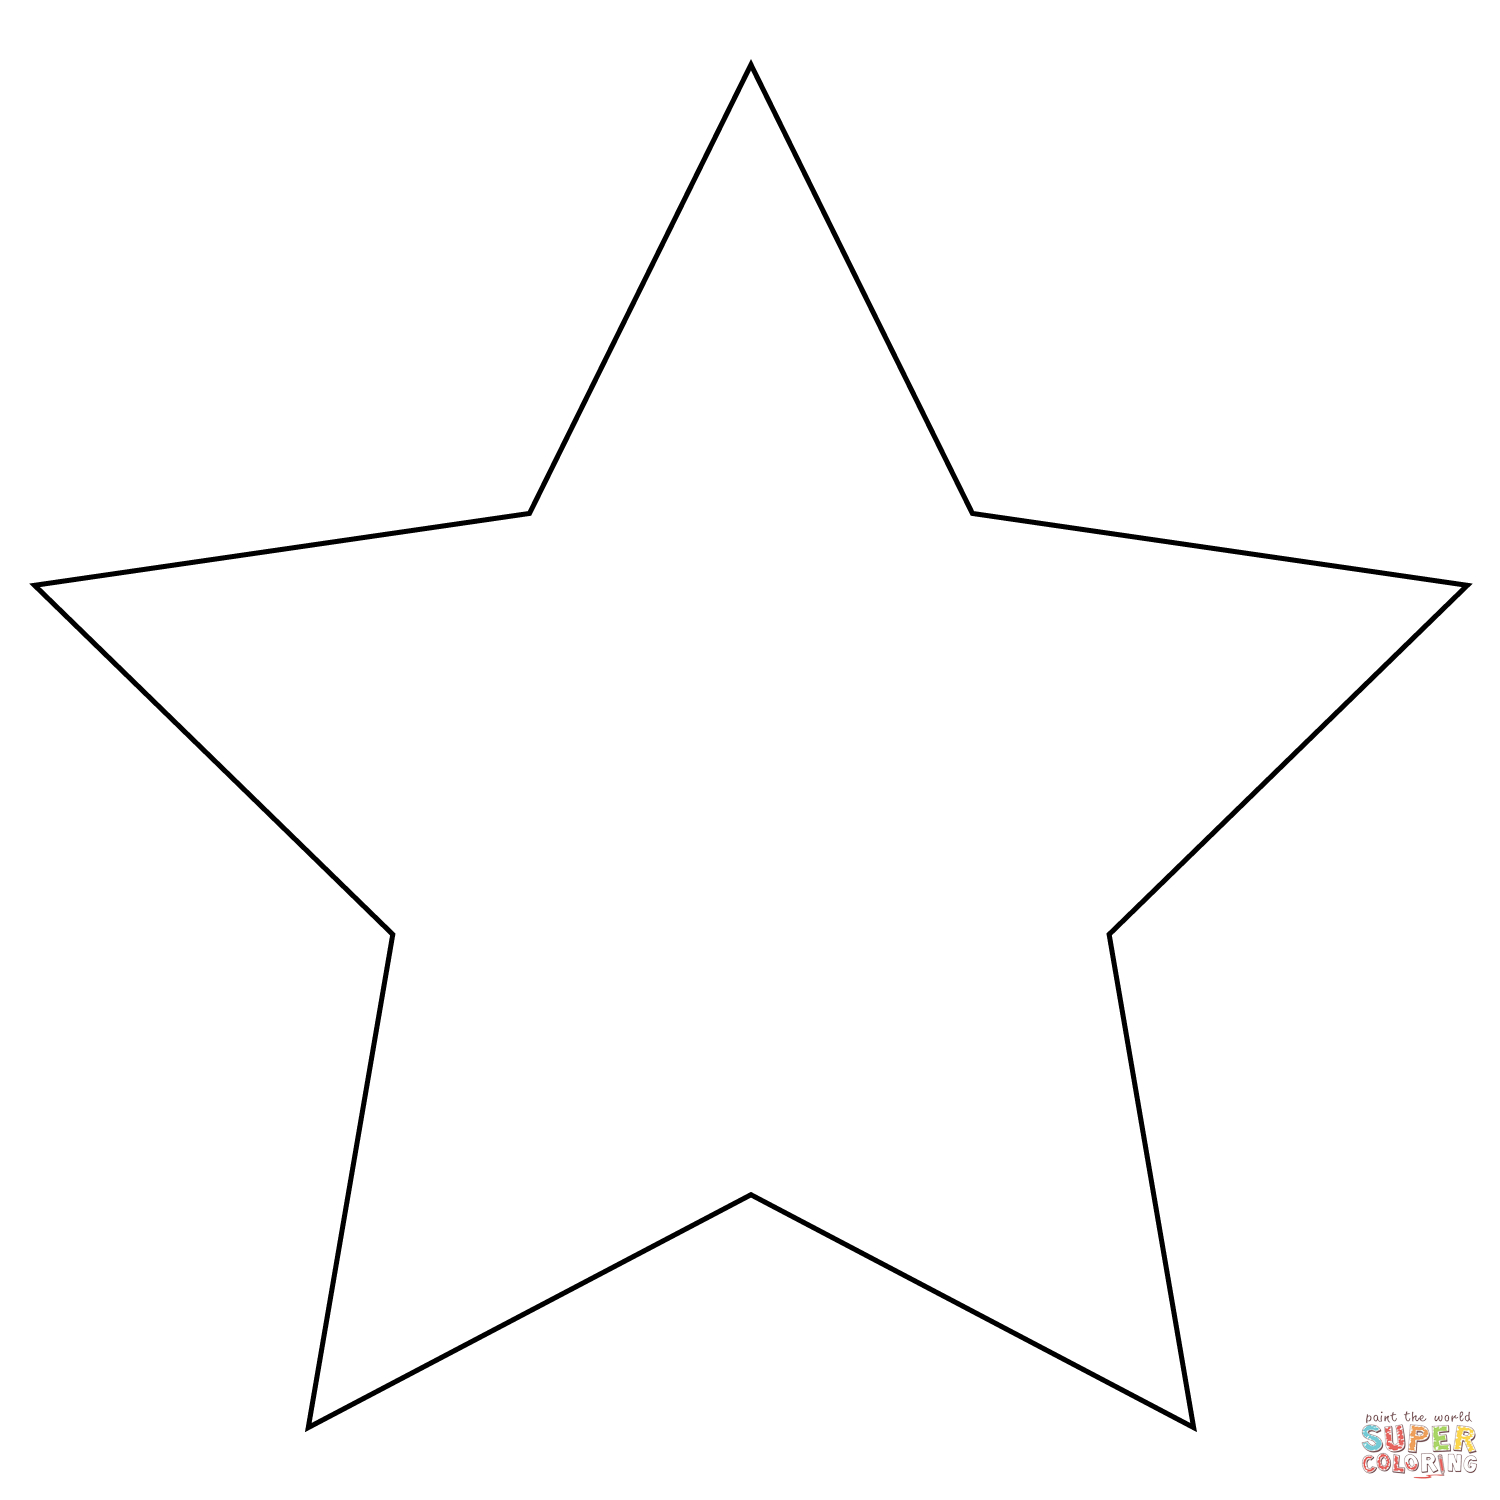 Coloring Page Of A Star Five Pointed Star Coloring Page Free Printable Coloring Pages